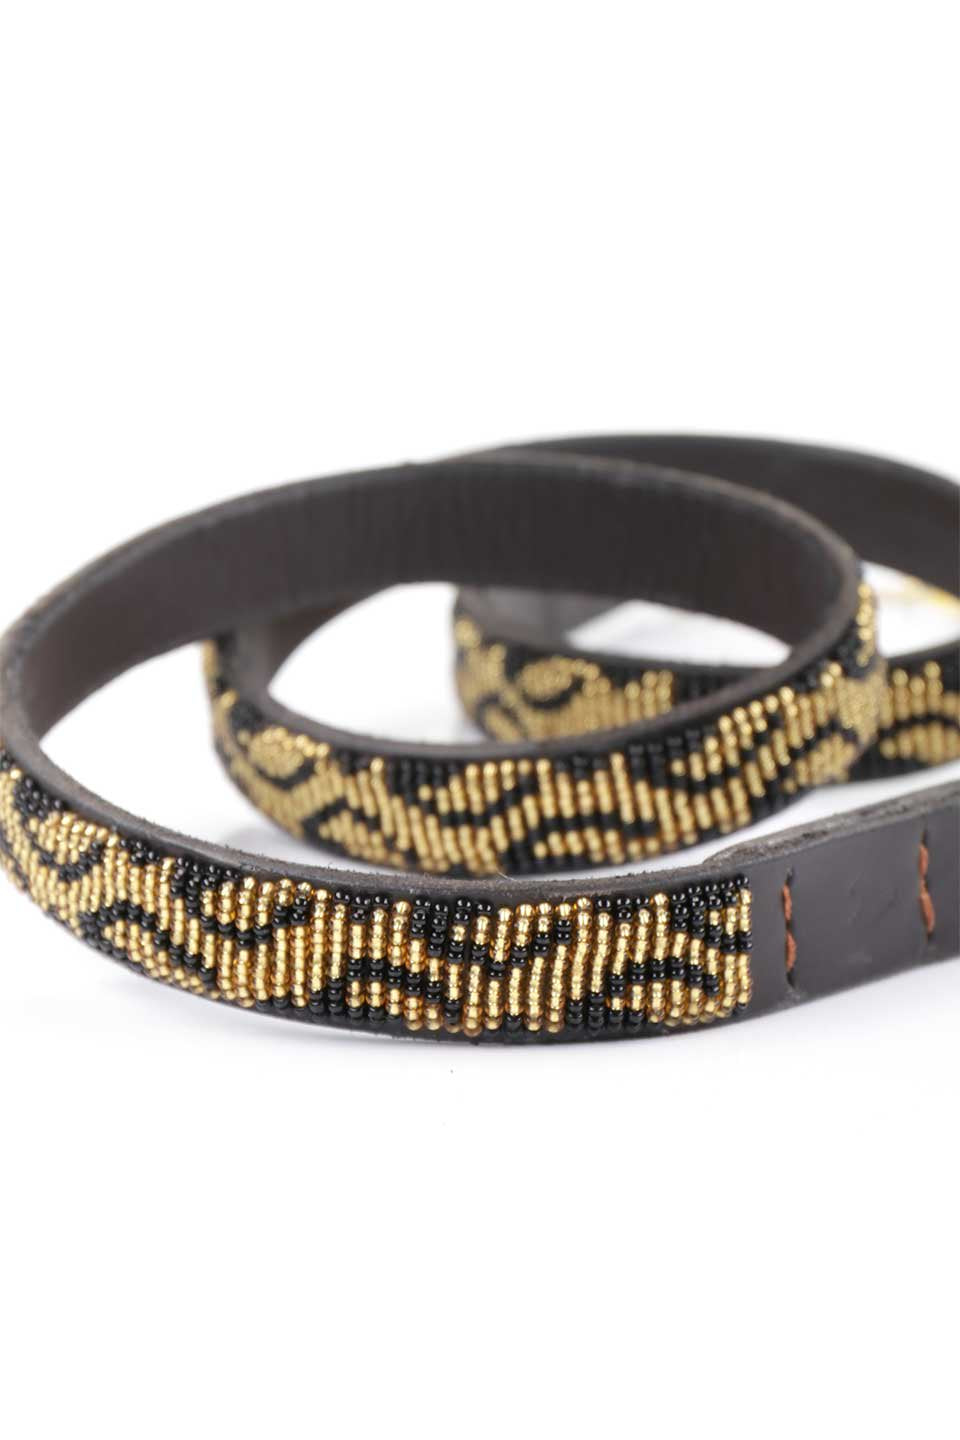 Leopard Beaded Dog Leash 3/4" レオパード・ビーズドッグリード / by THE KENYAN COLLECTION